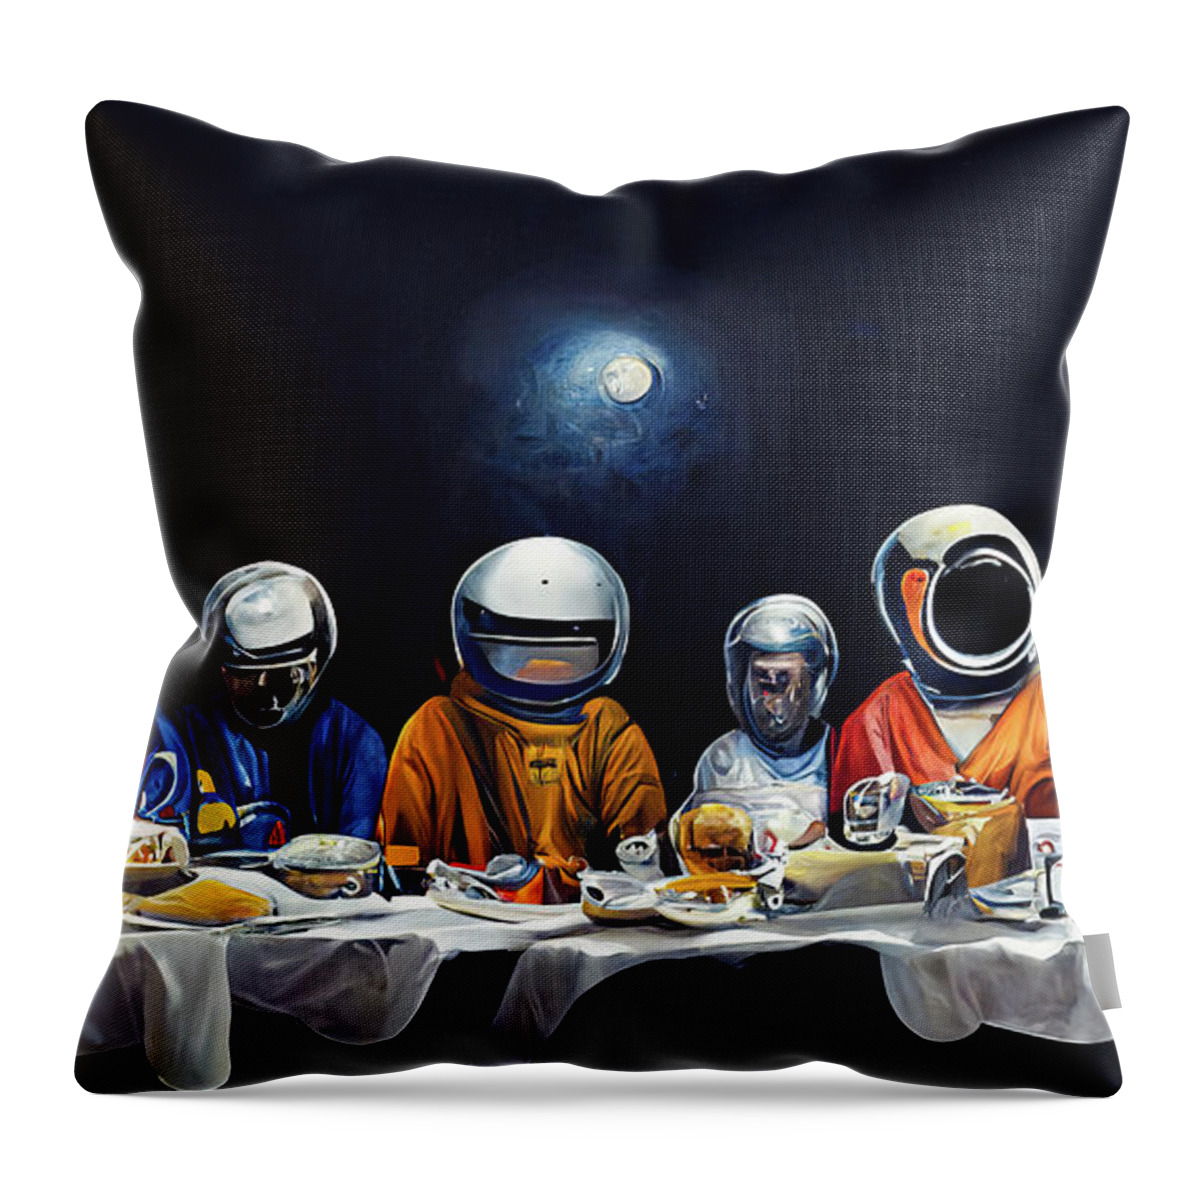 Last Supper Throw Pillow featuring the digital art The last supper 01 astronauts eating their food by Matthias Hauser